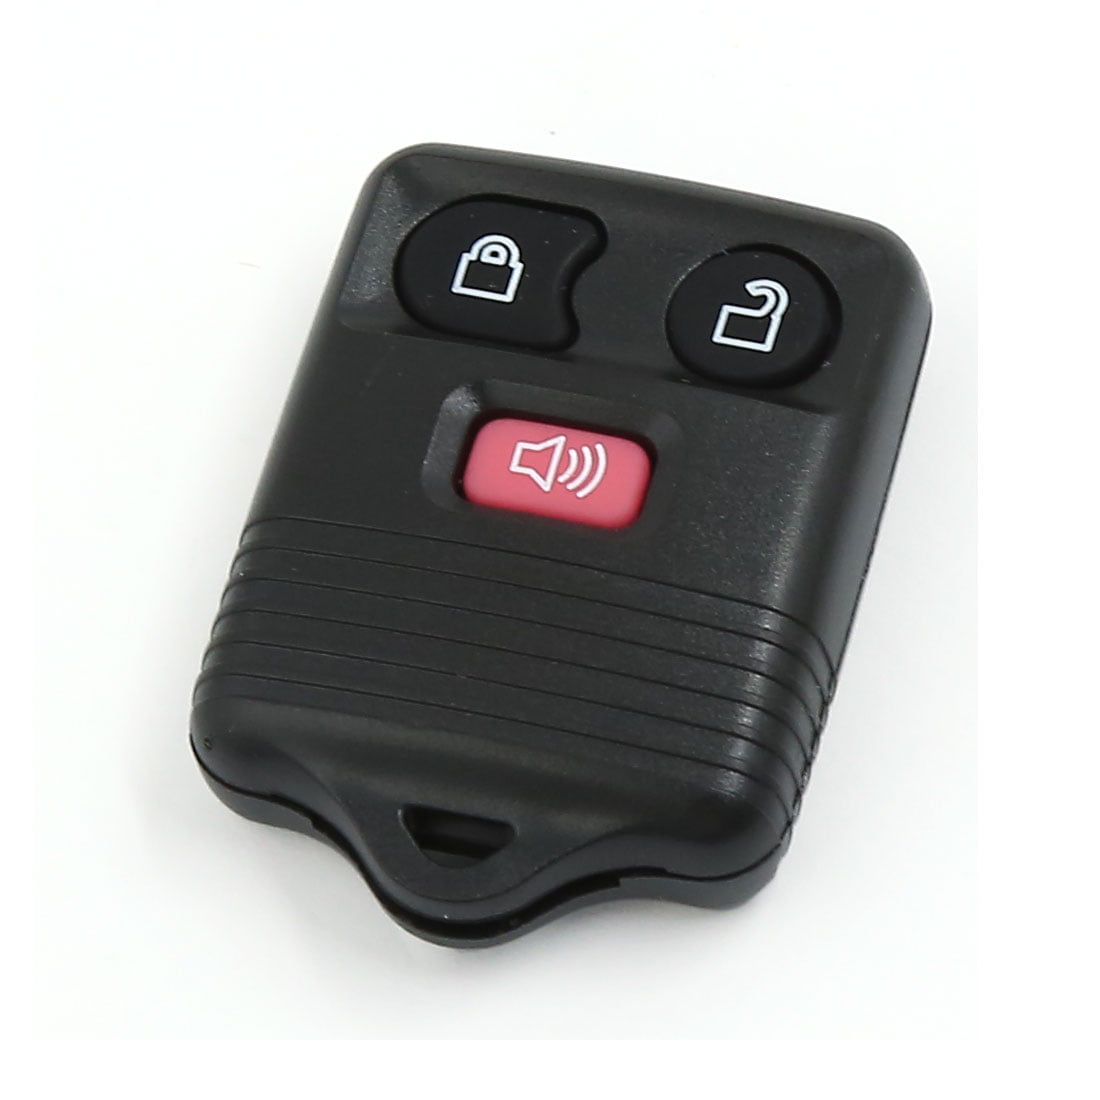 GT STYLE FLIP KEY REMOTE FOR LINCON 80BIT CLICKER CHIP KEYLESS ENTRY FOB BEEPER